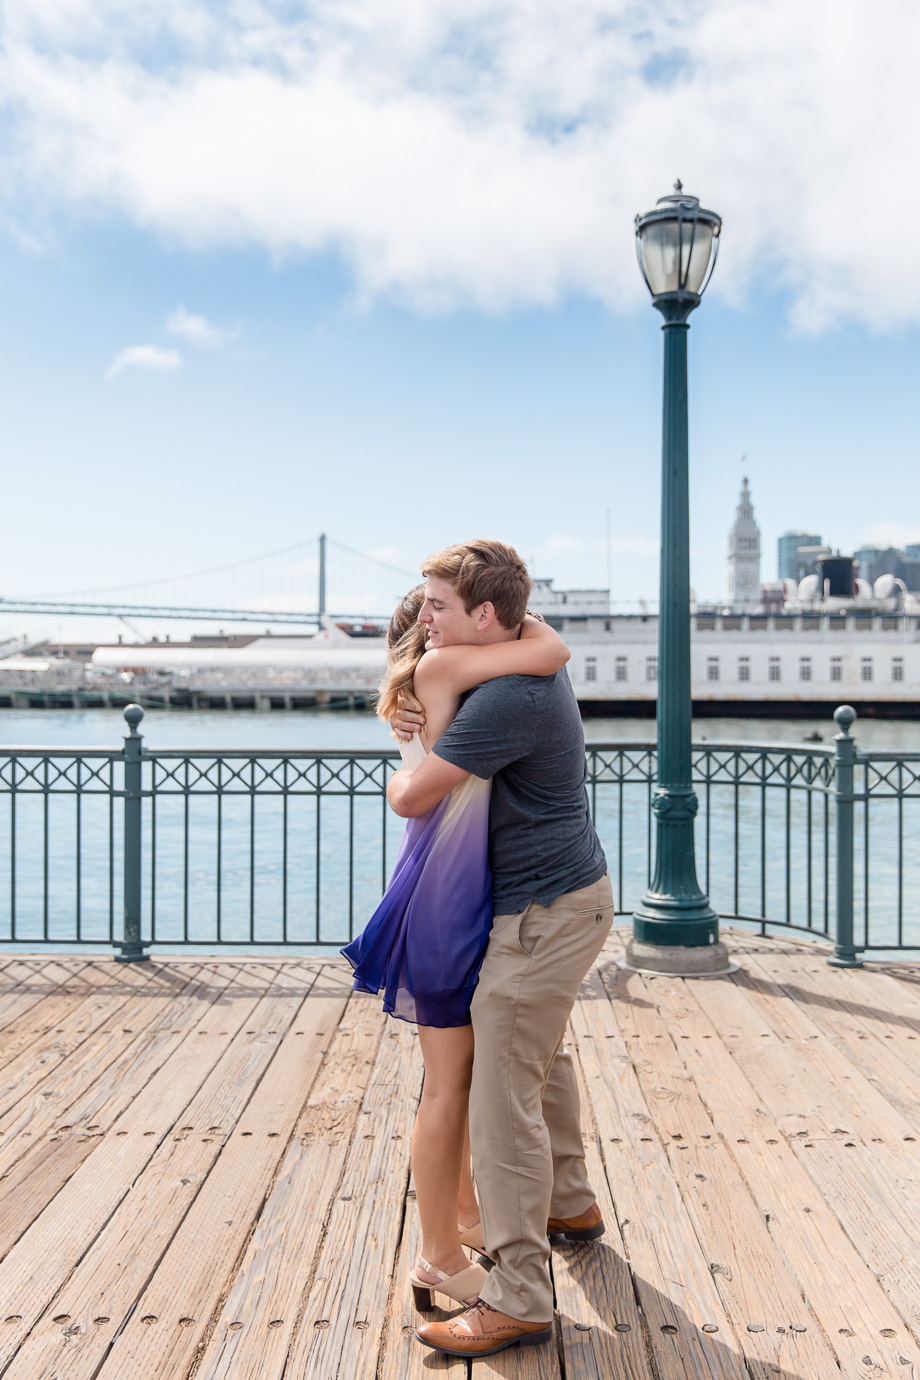 a warm hug after the sf surprise marriage proposal on the pier